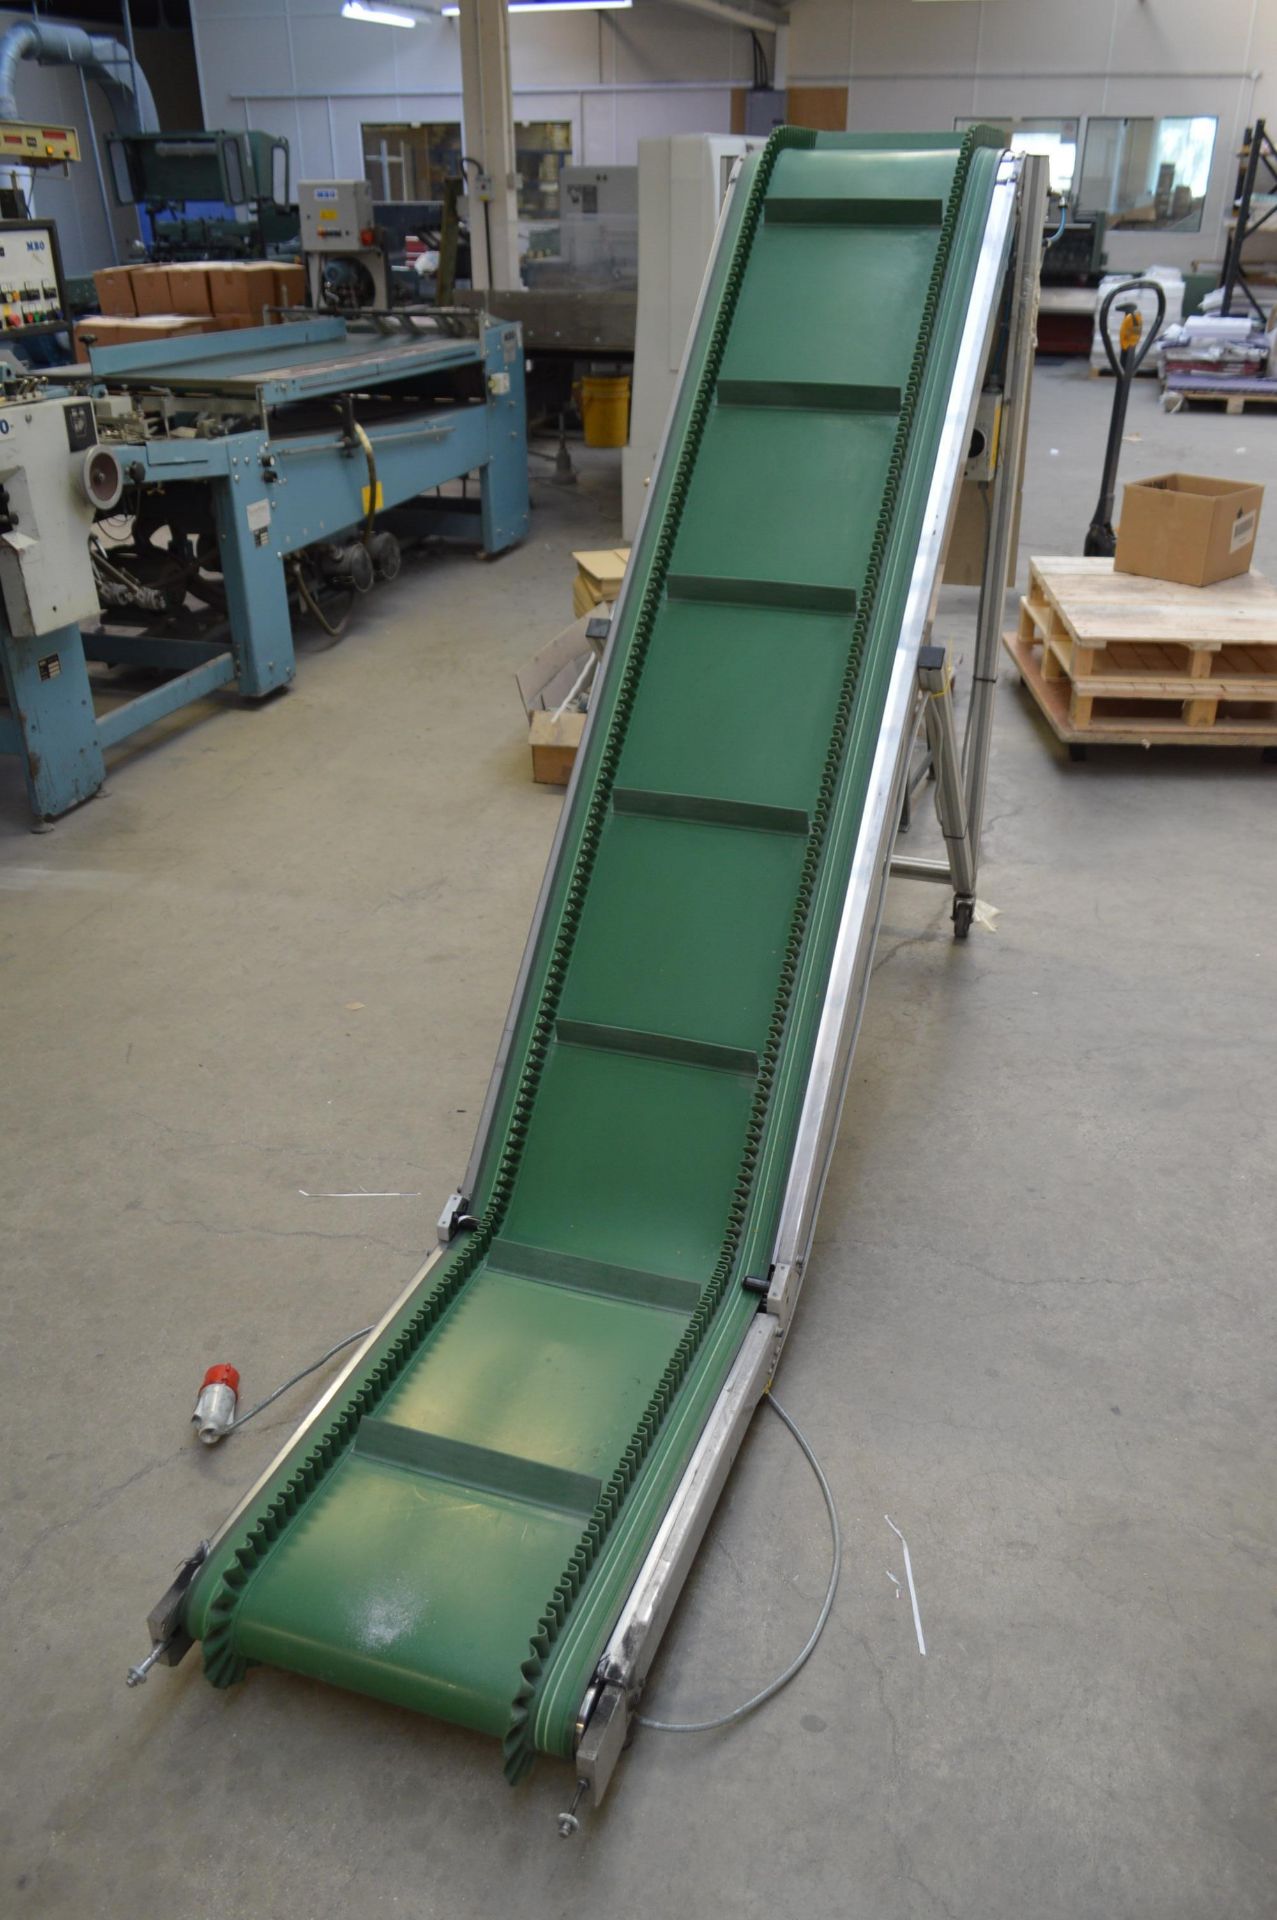 Busch KF 145 350mm wide WASTE CONVEYOR, serial no. 814/767, year of manufacture 2006, 1.6m discharge